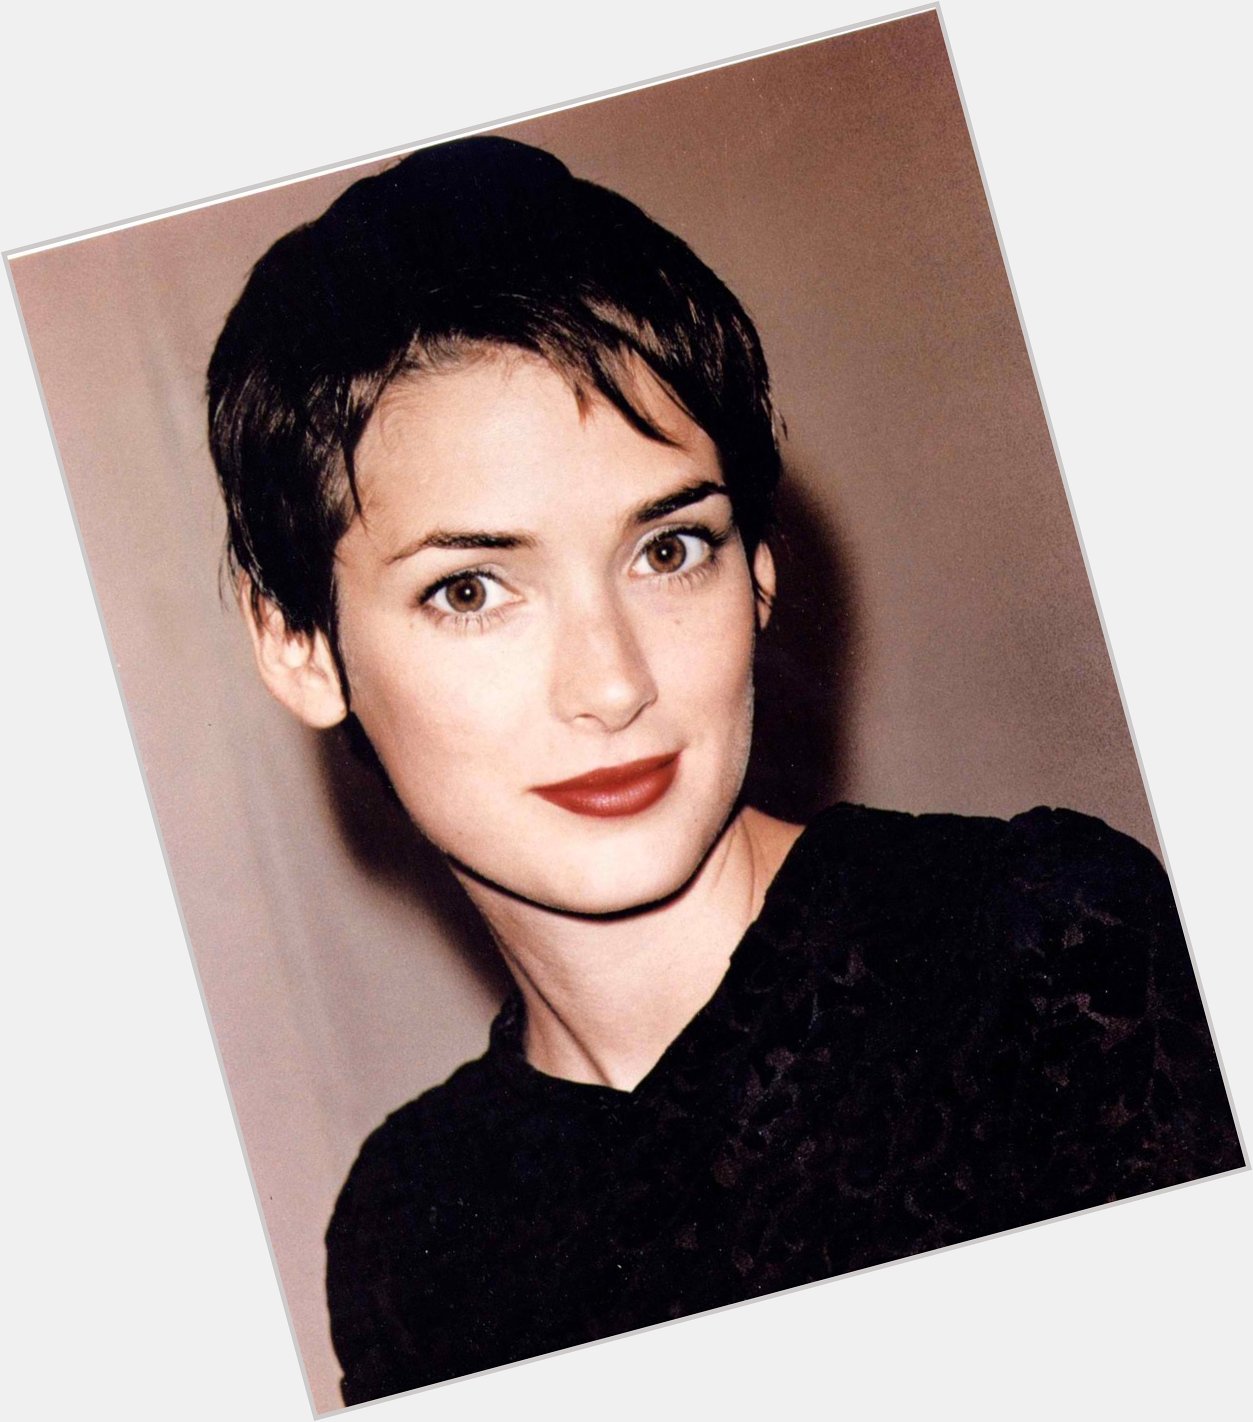 Happy Birthday Winona Ryder!! Thank you for your amazing performance in \"Girl, Interrupted\", my favorite movie! 